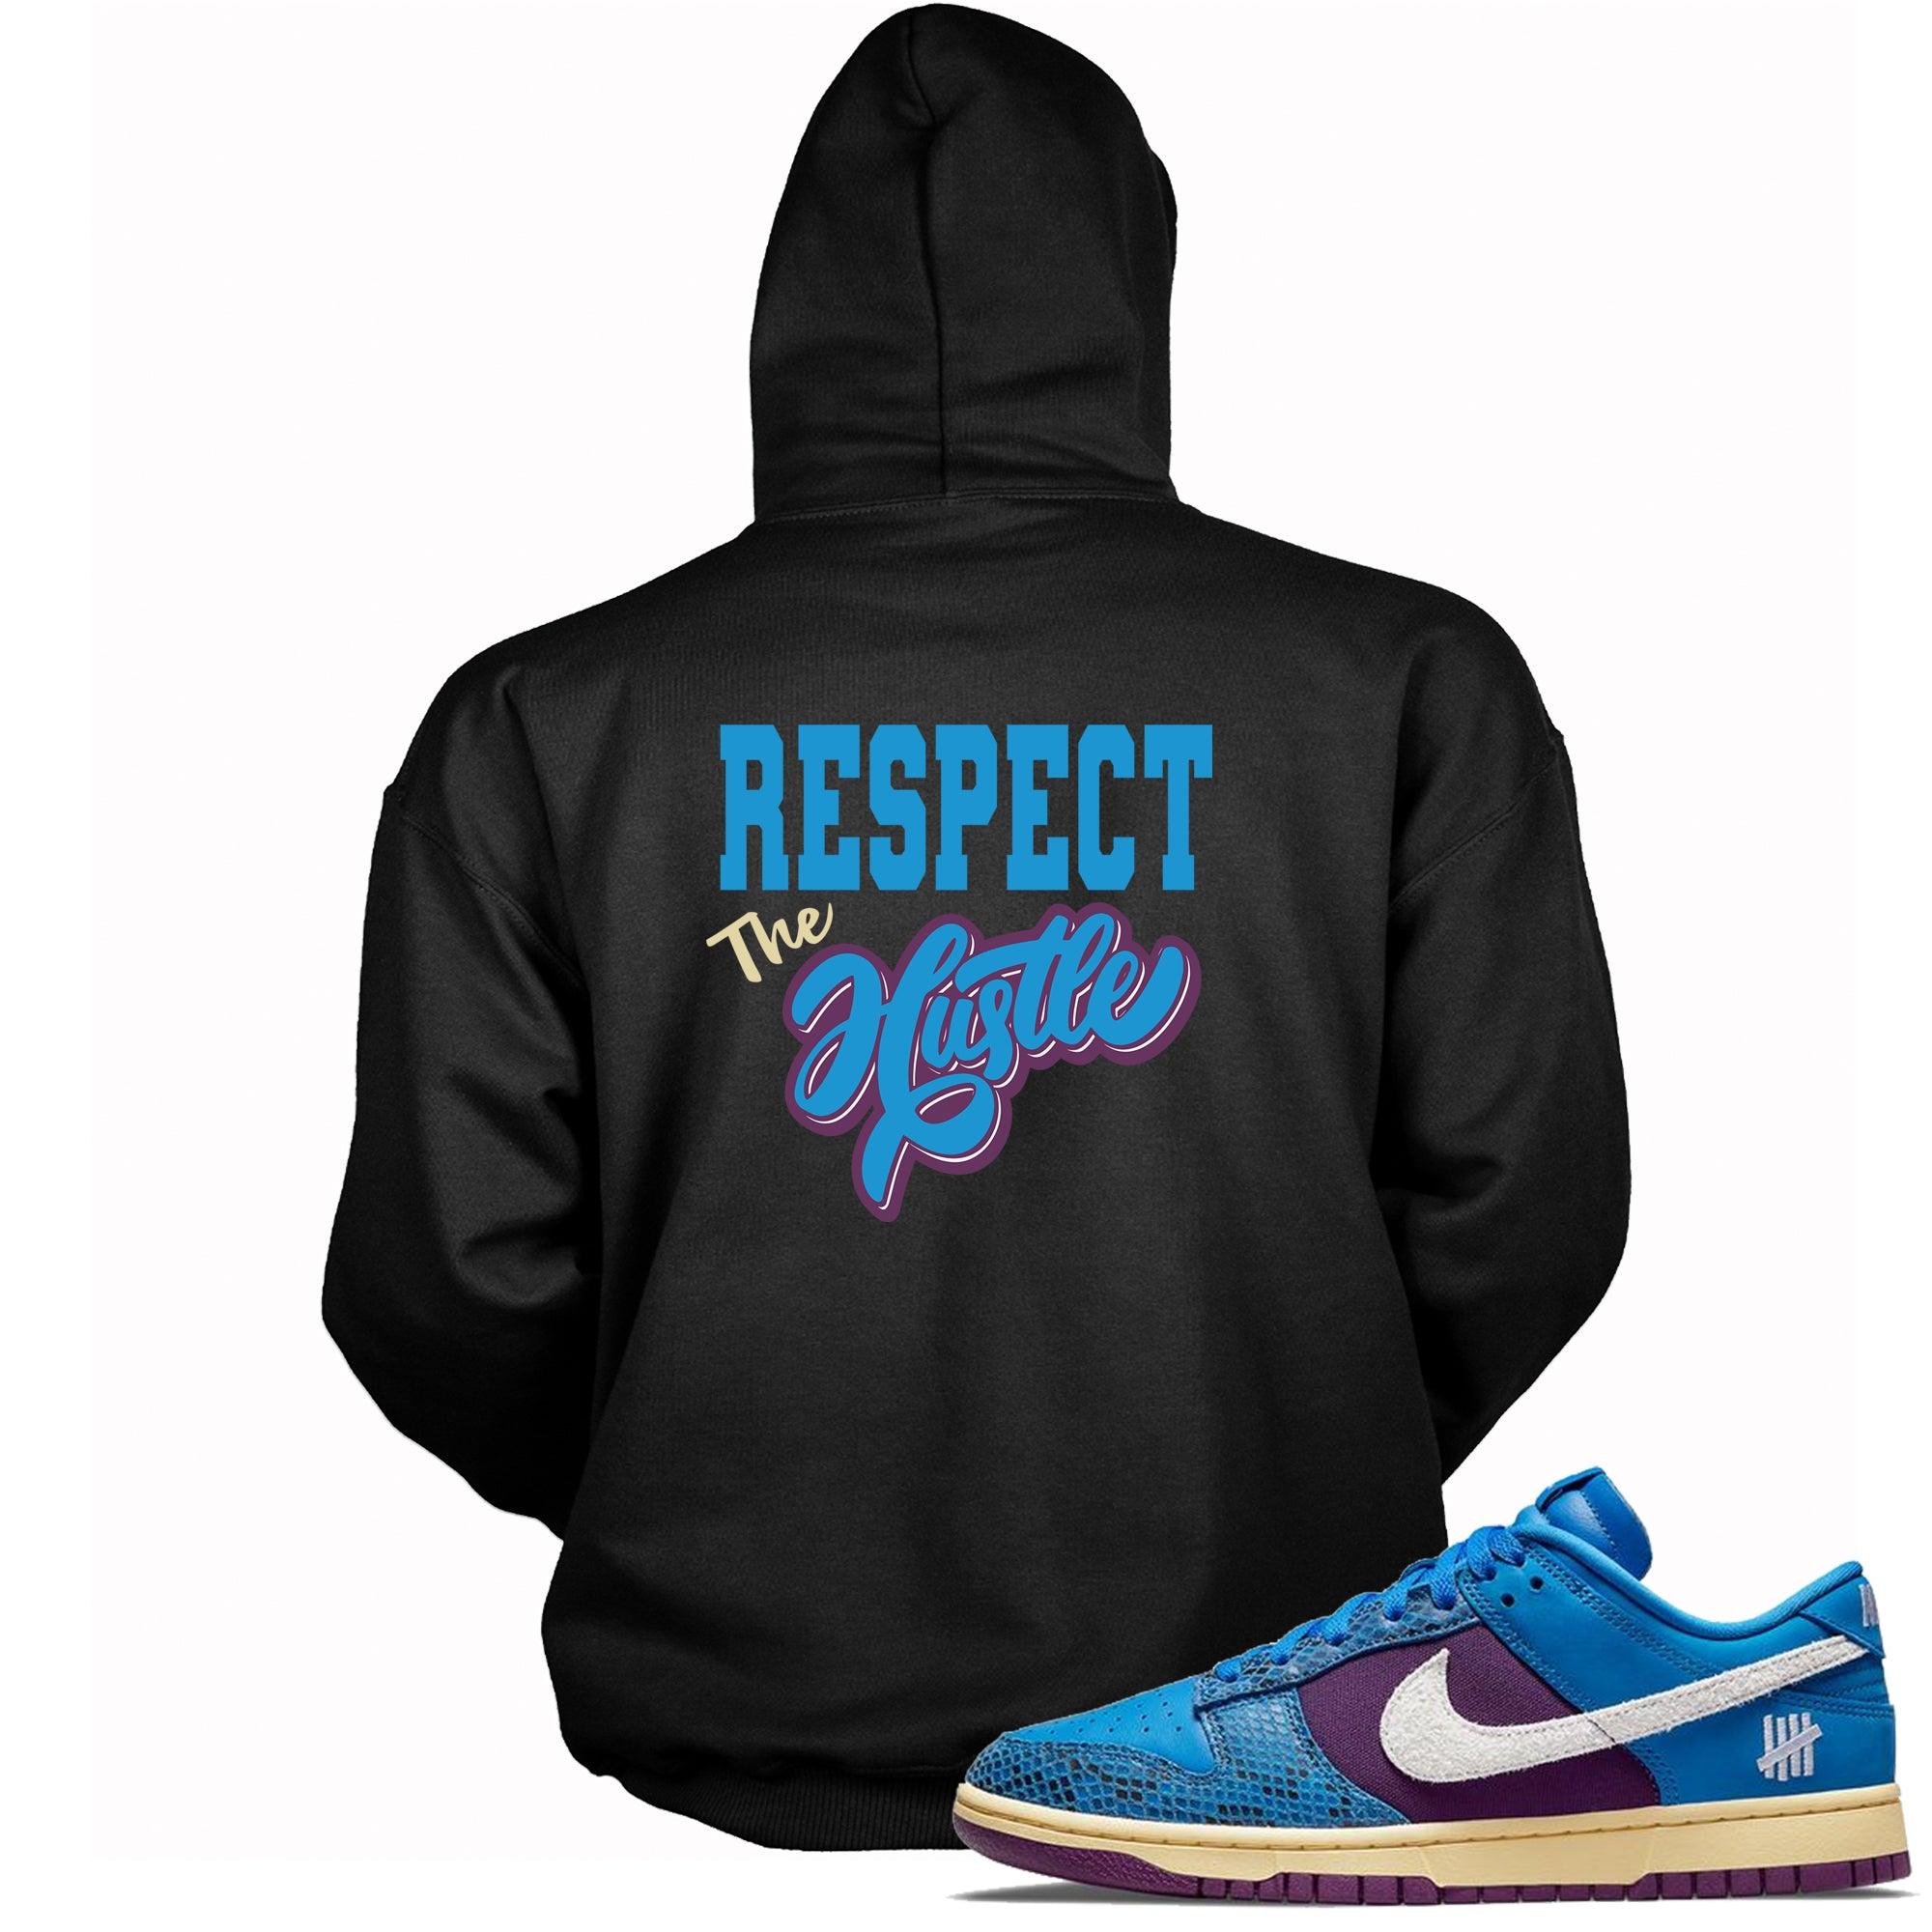 Black Respect The Hustle Hoodie Nike Dunk Low Undefeated 5 On It Dunk vs AF1 photo